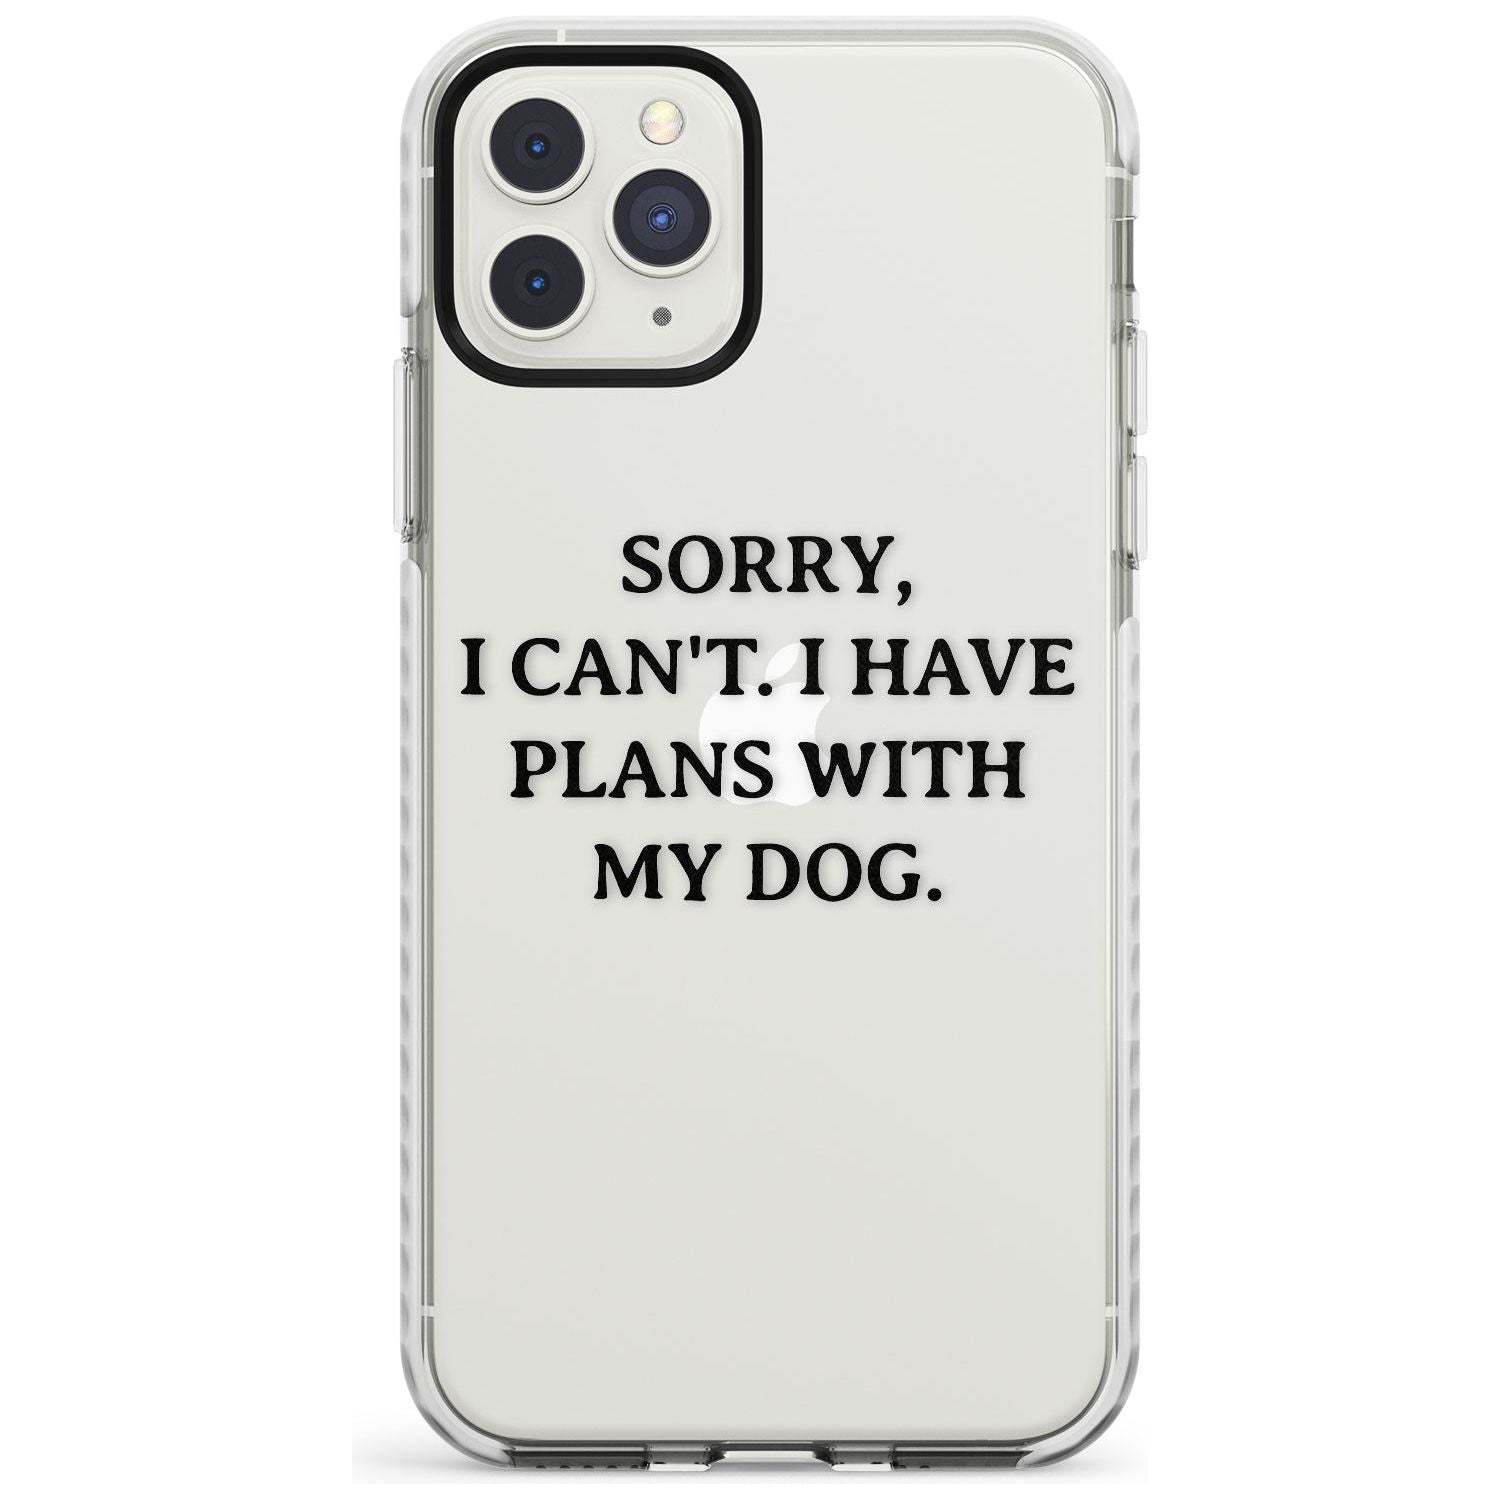 Plans with Dog Impact Phone Case for iPhone 11 Pro Max